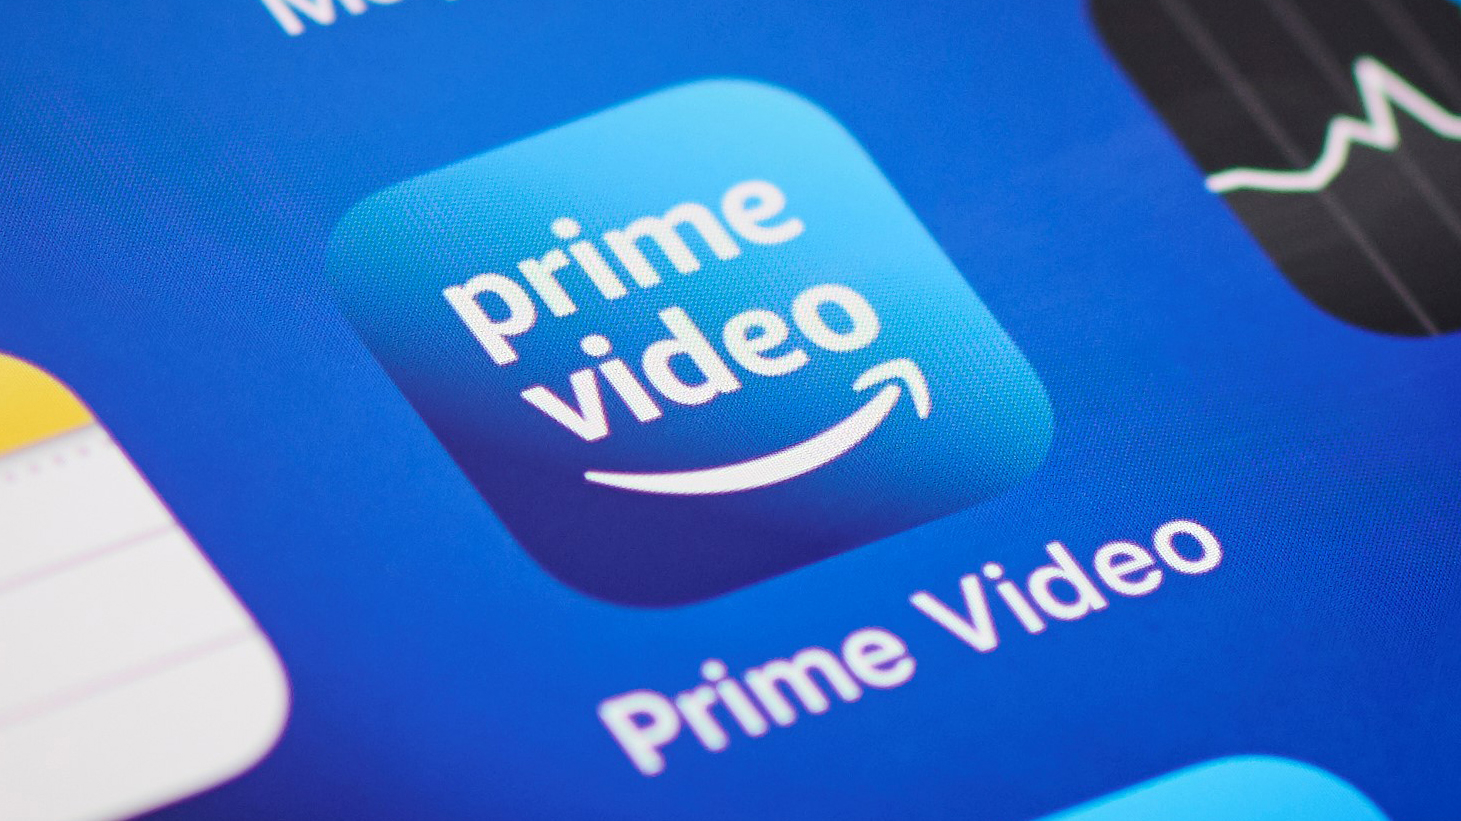 Top 3 Prime Video Exclusive To Watch After You Get Amazon Prime For Free